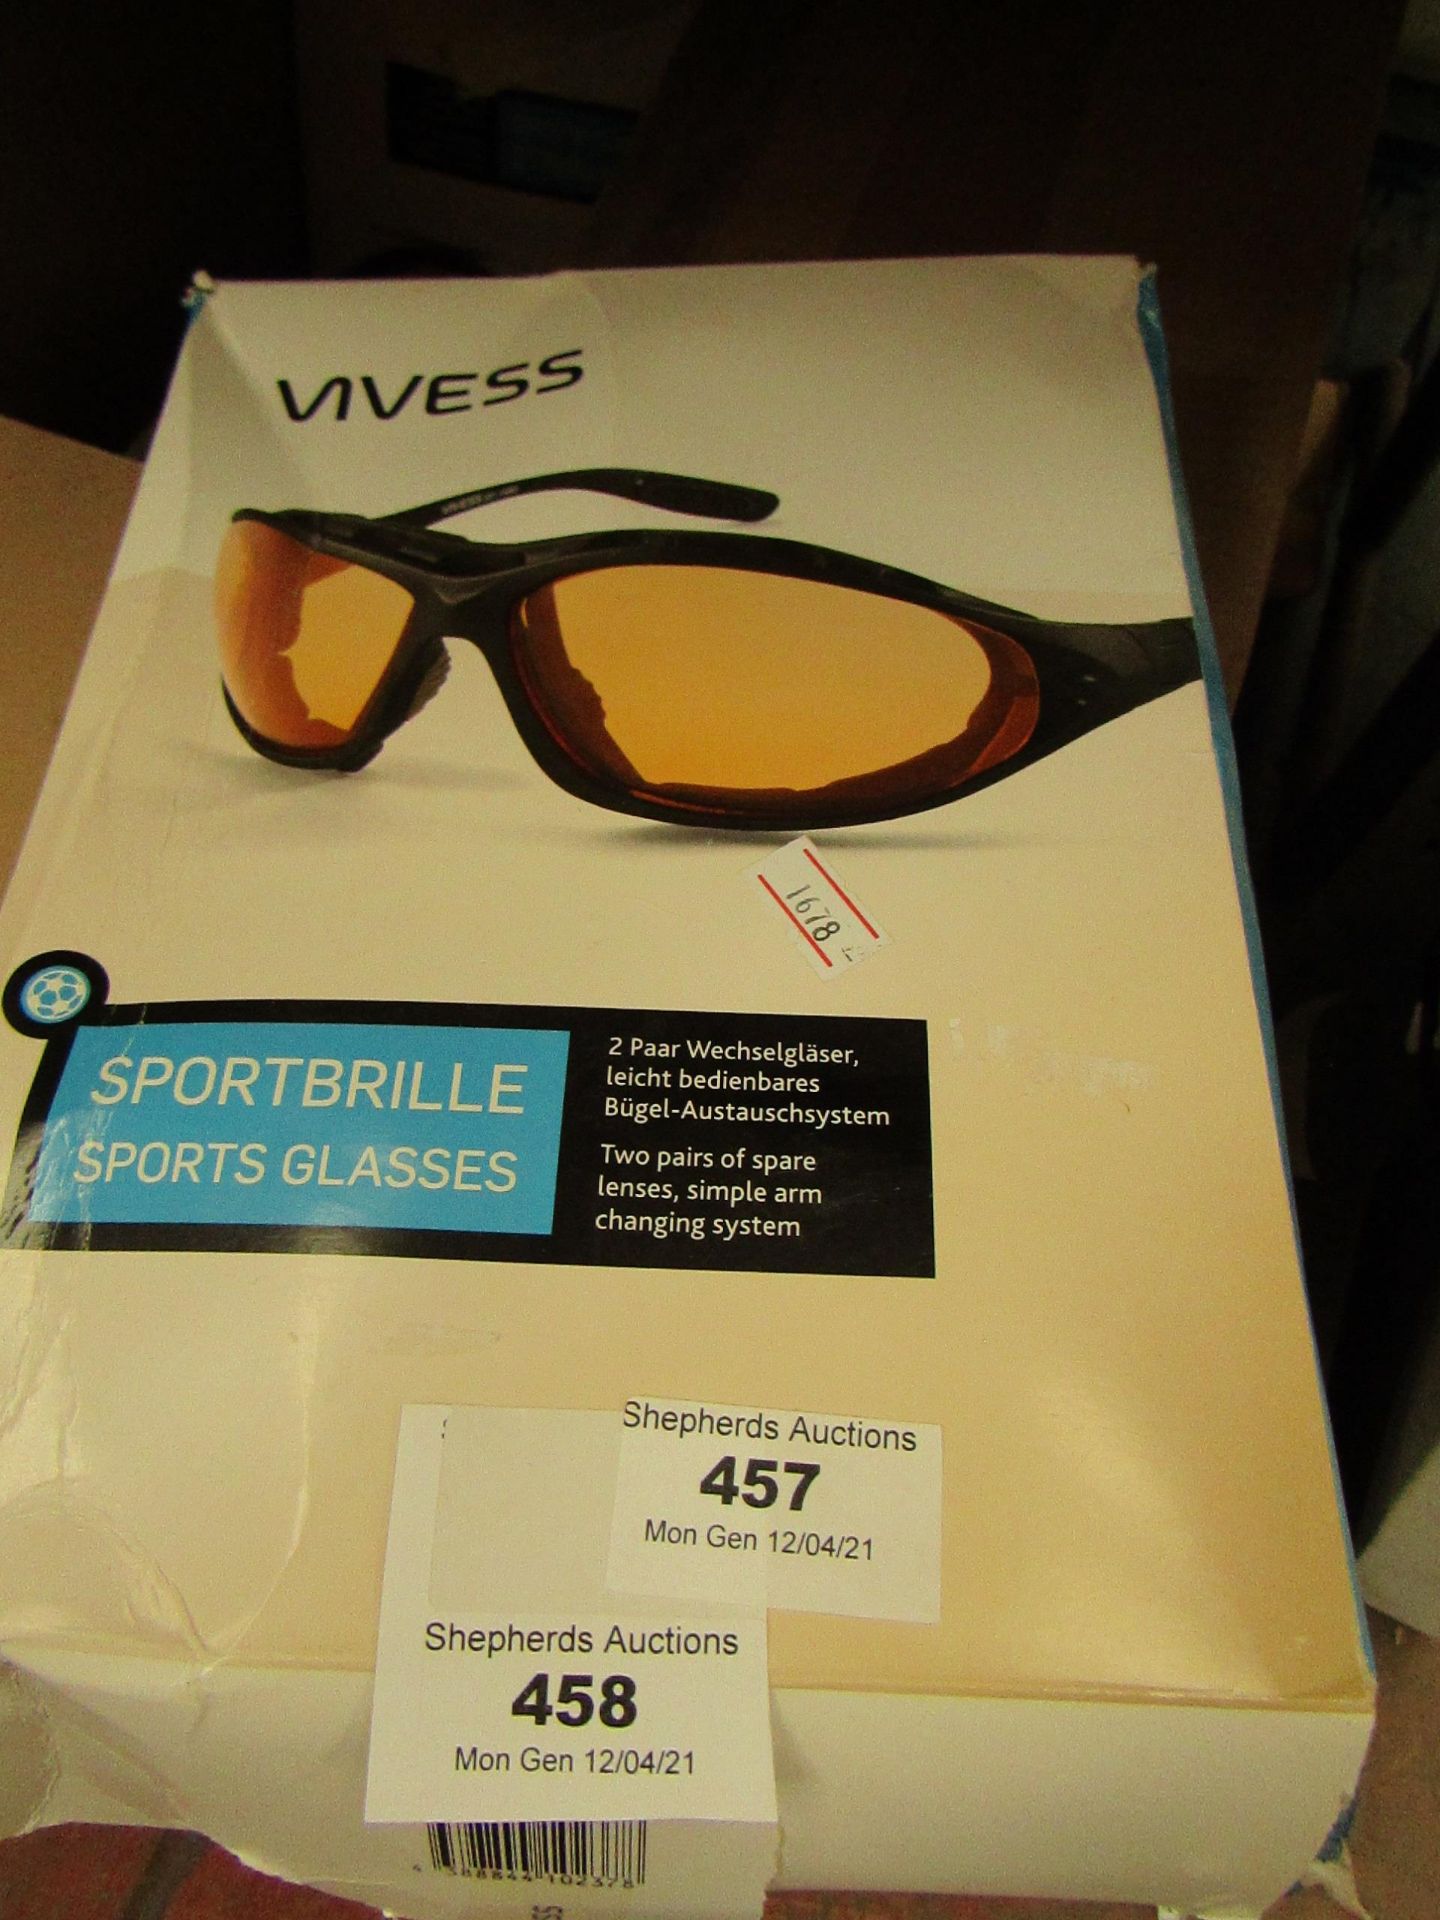 5x Vivess SportBrille Sports Glasses - New & Boxed (but may have damaged packaging)